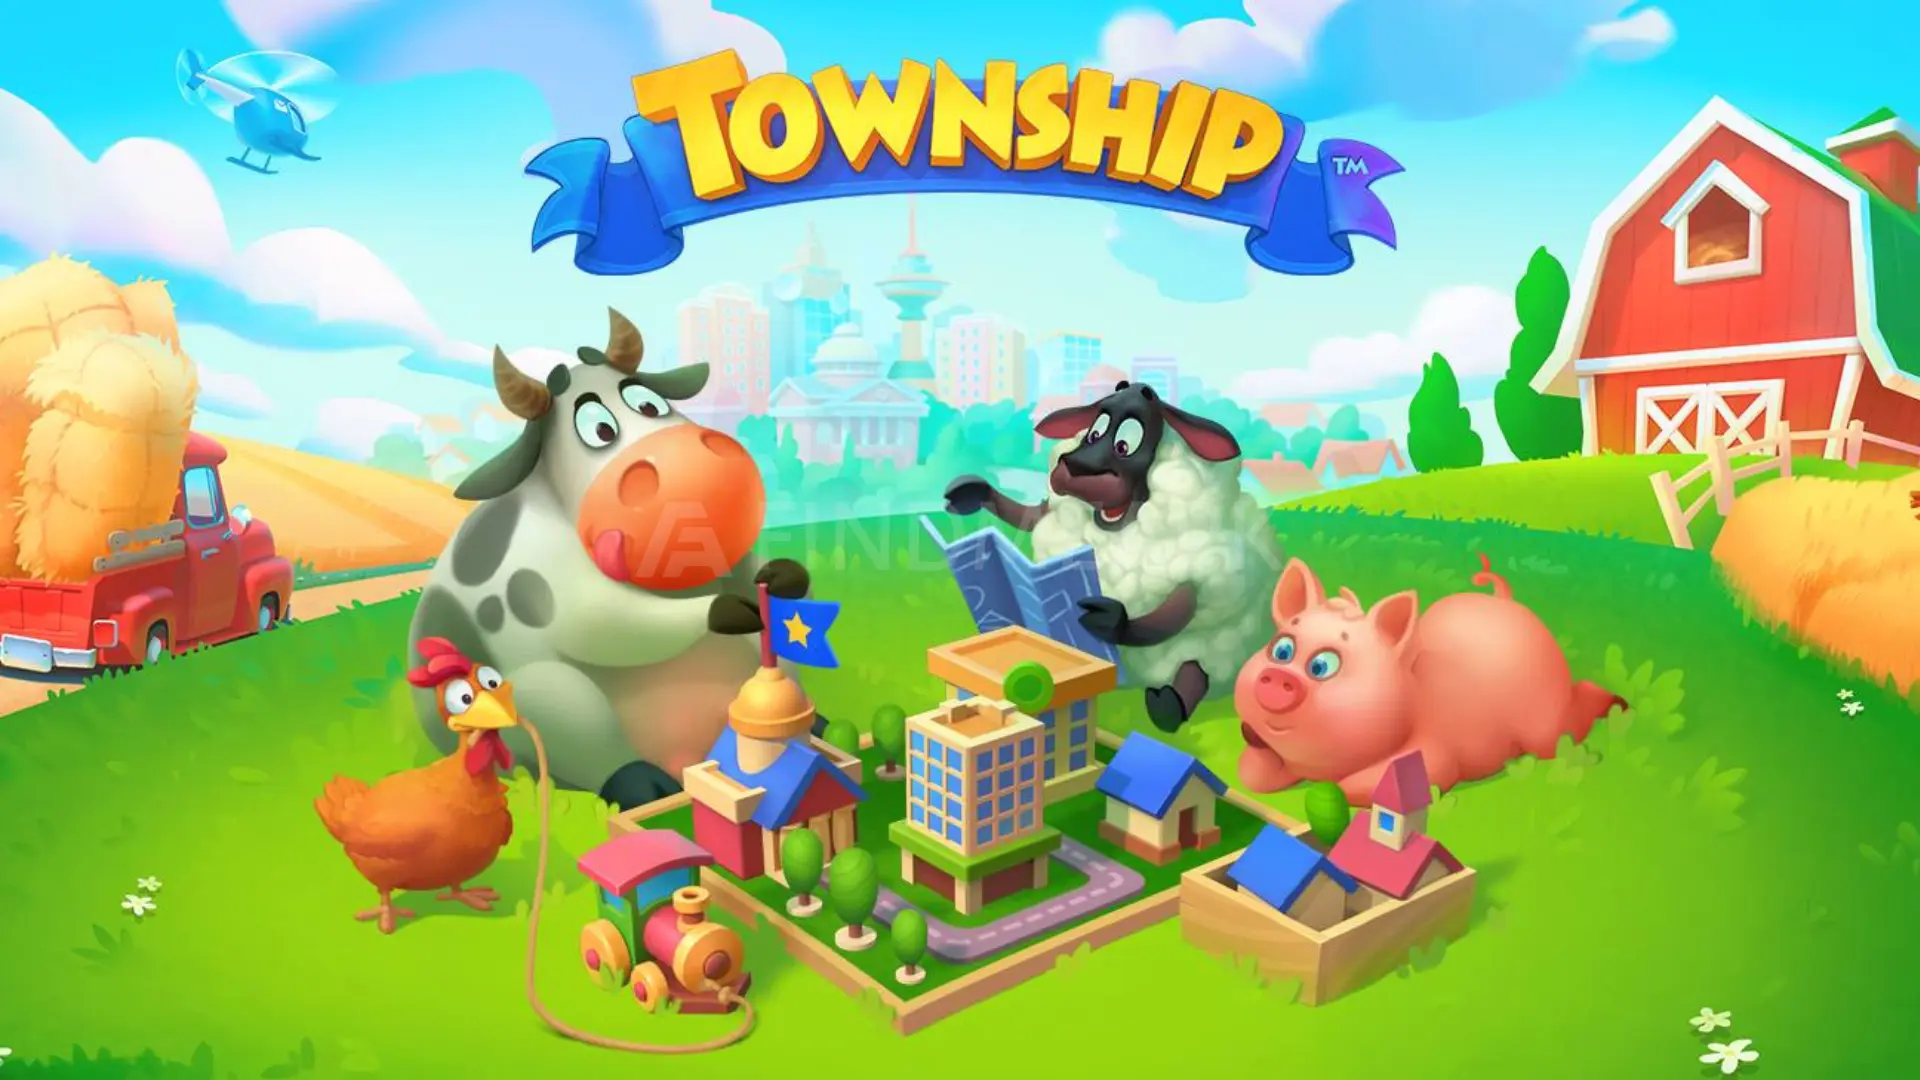 Township feature image